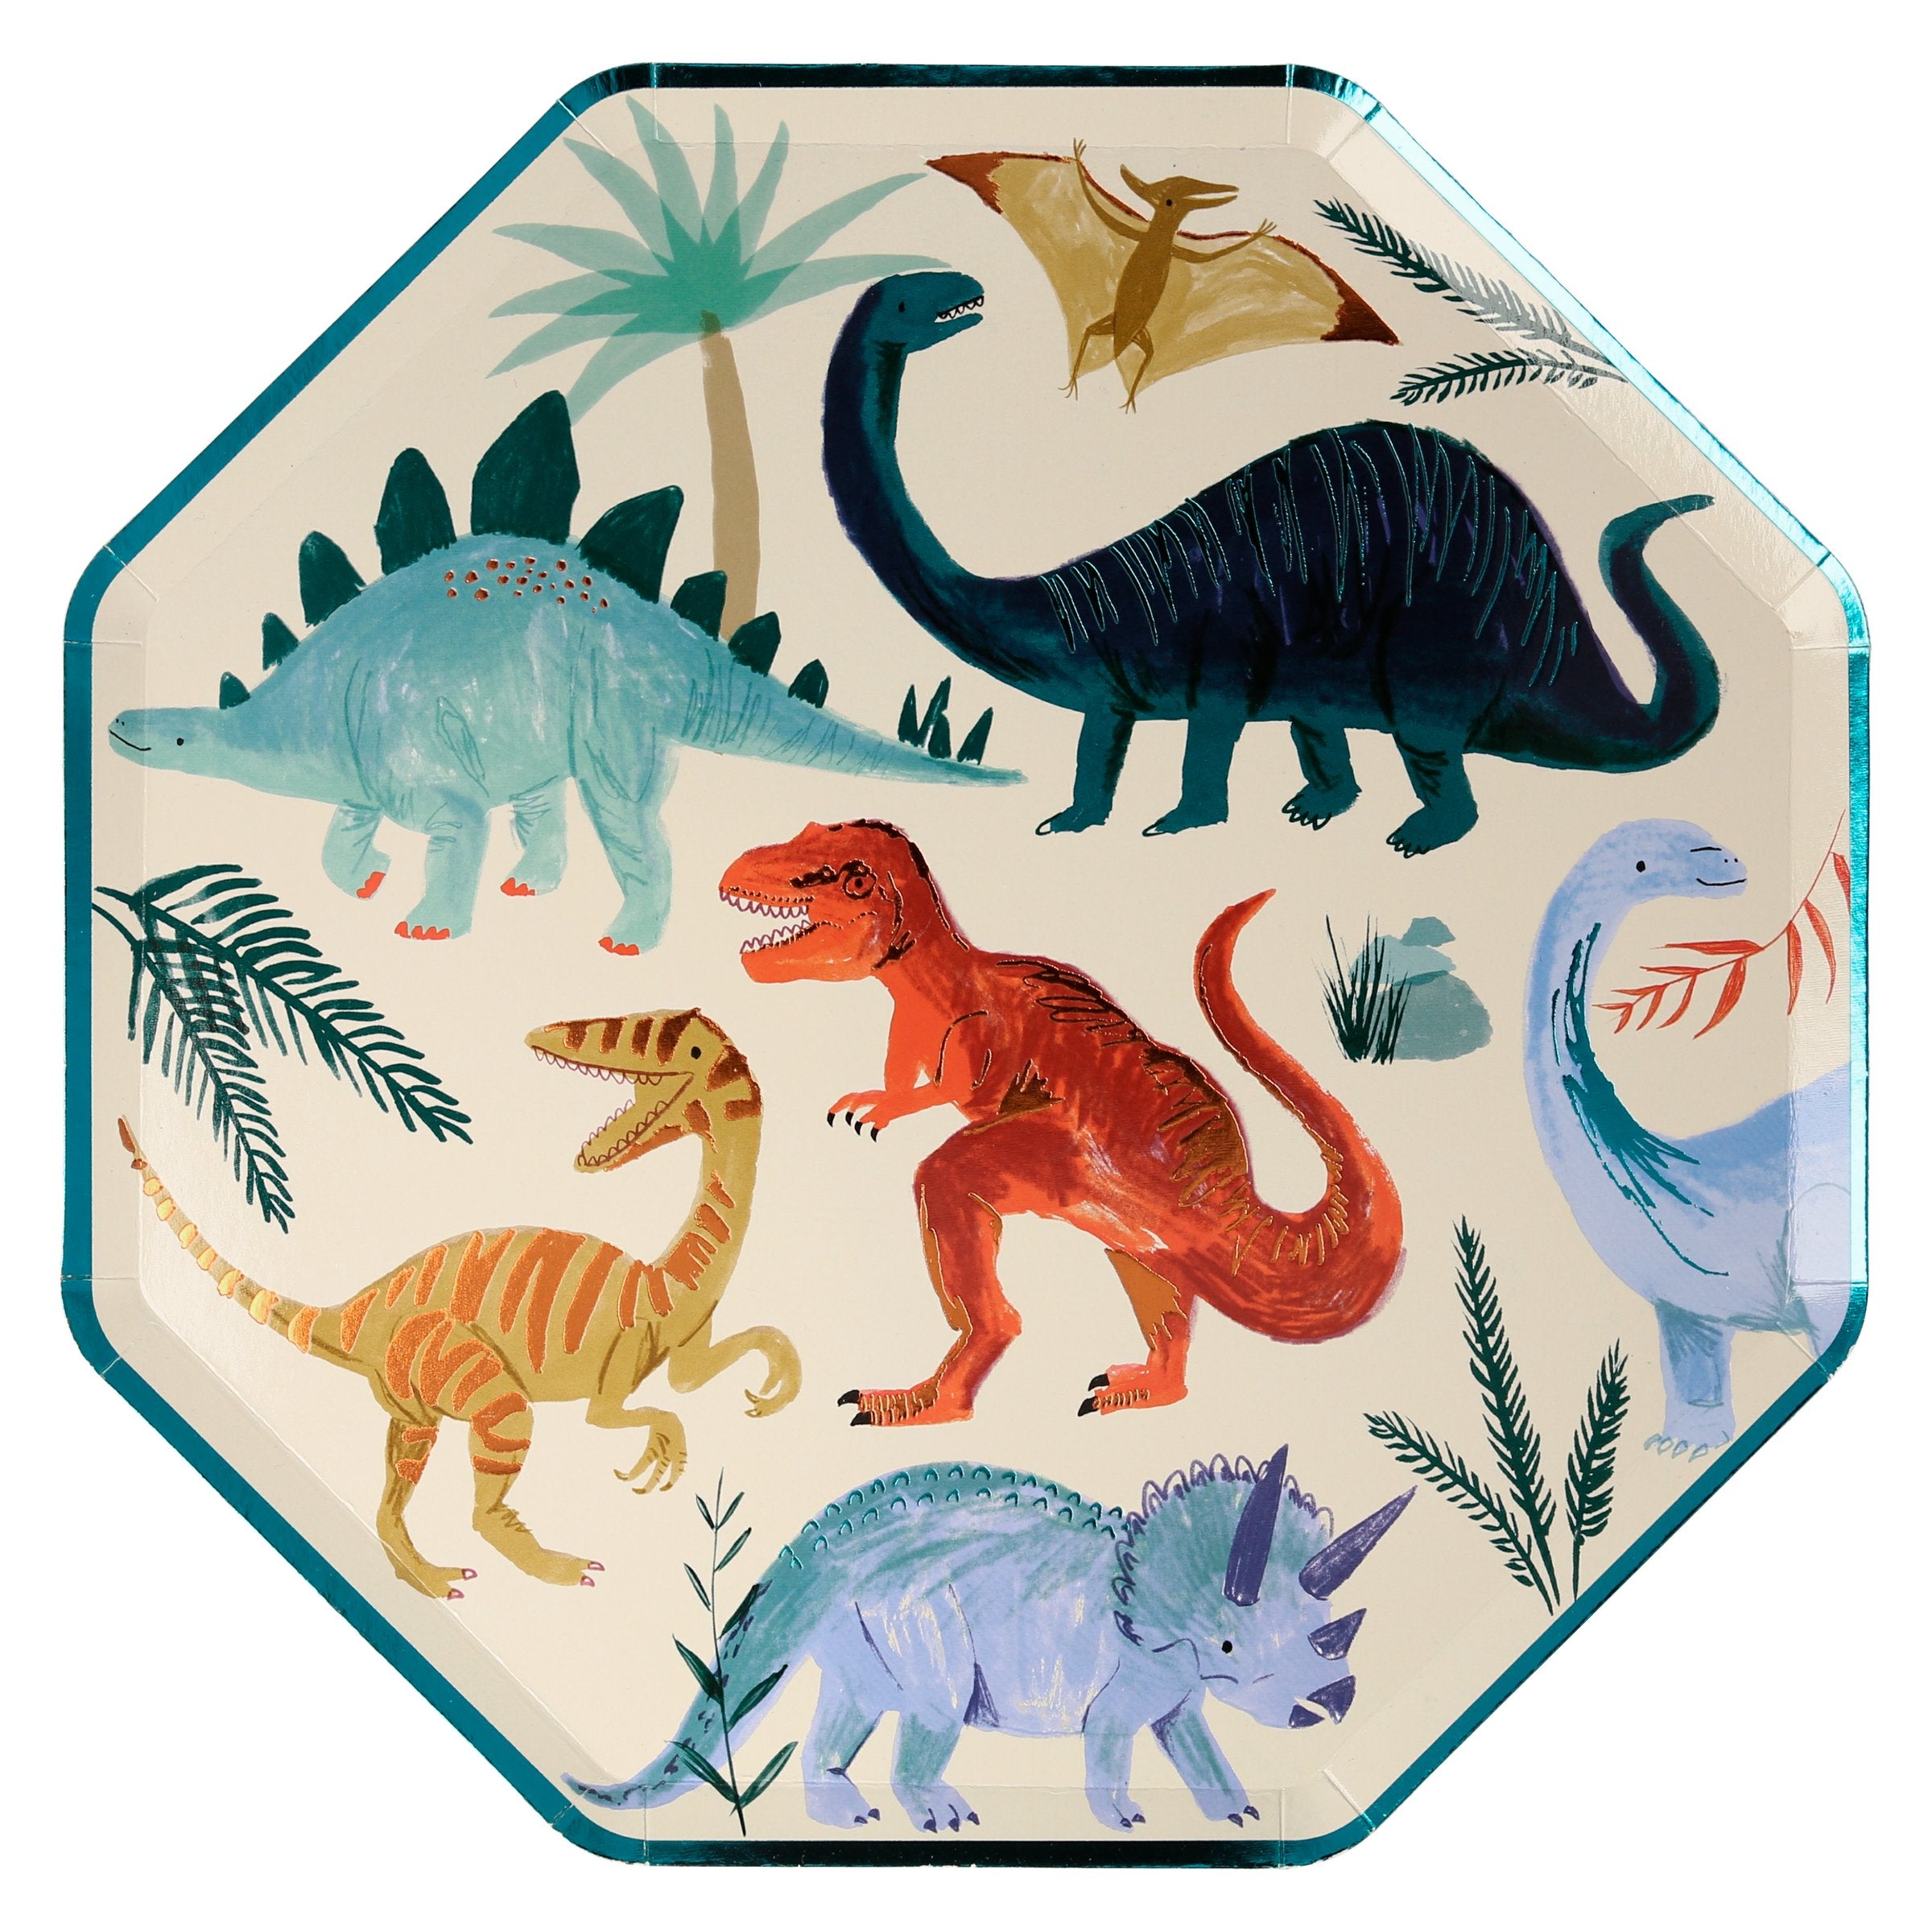 If you're looking for dinosaur party decoration ideas then our special paper plates featuring colorful dinosaurs are perfect.